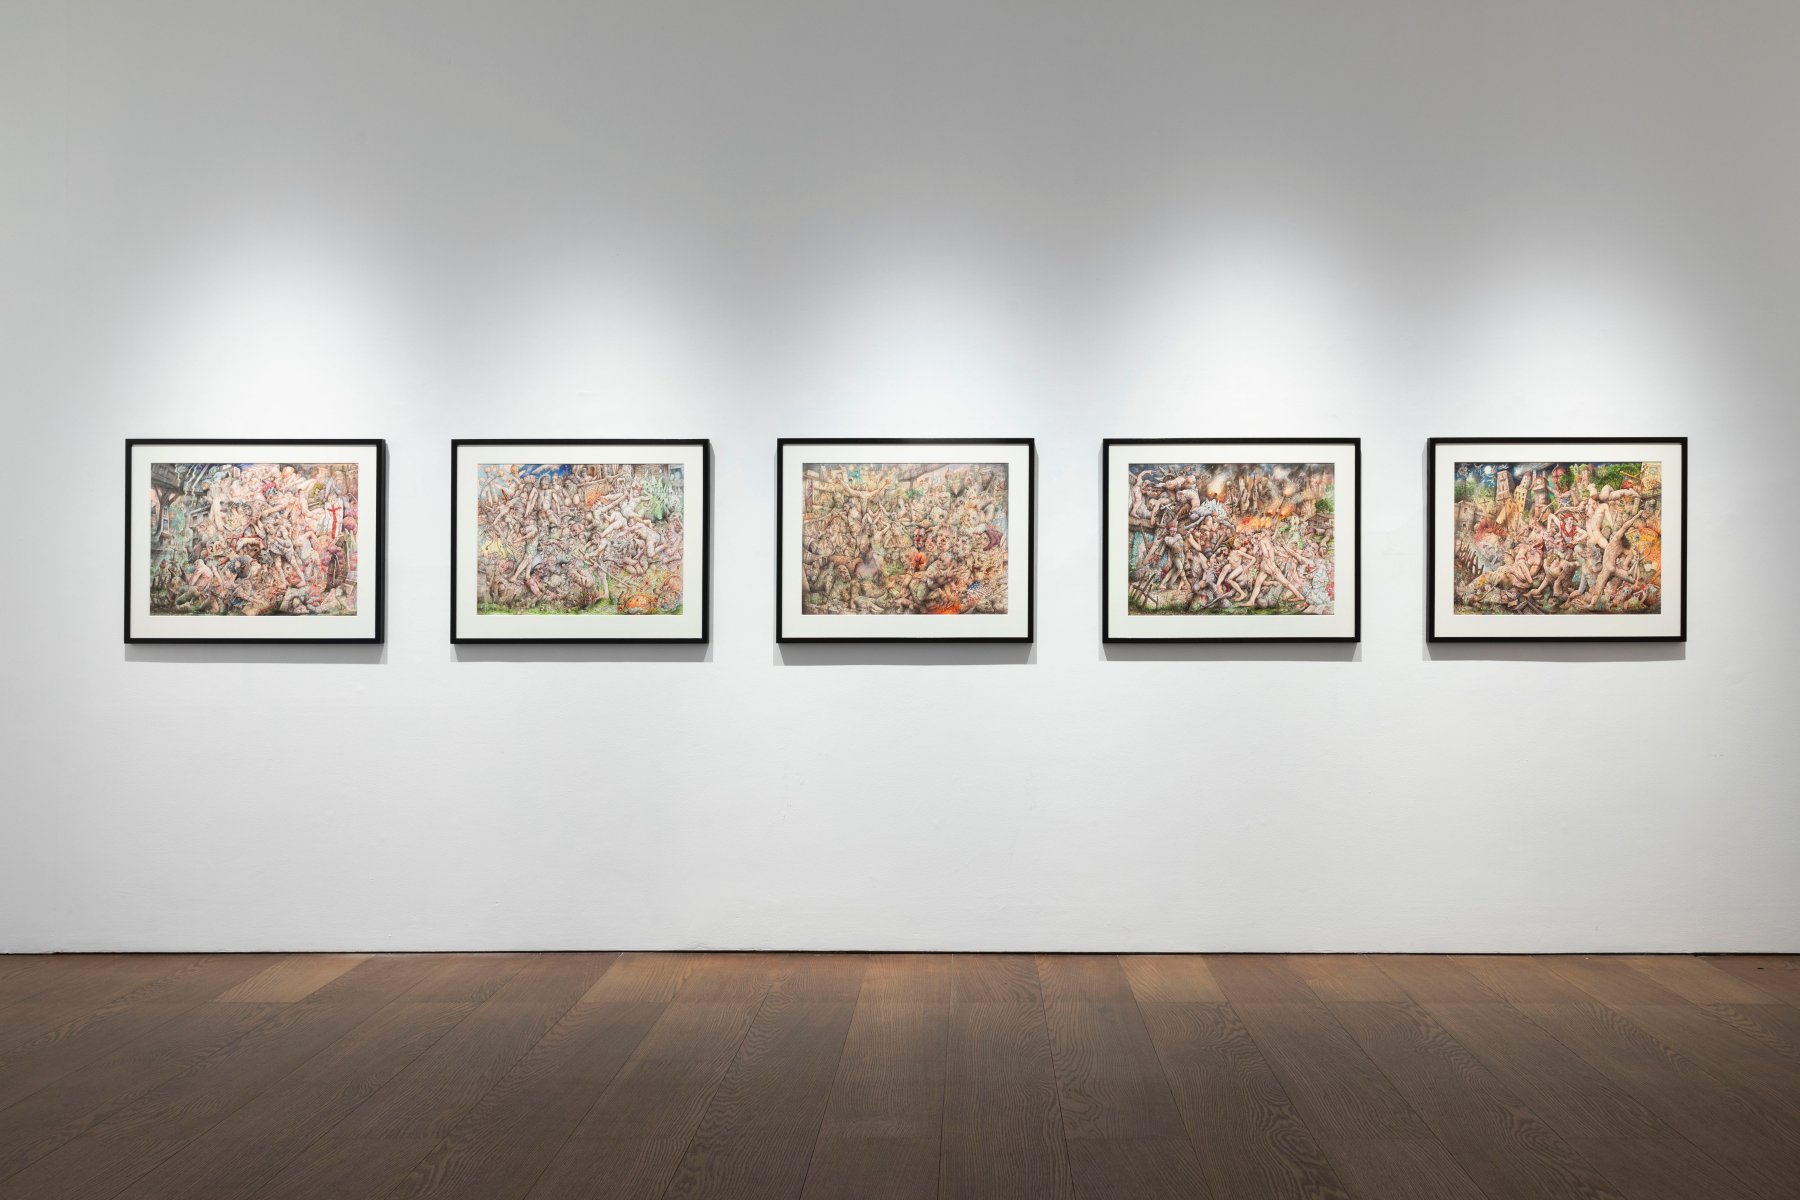 Installation image for Peter Howson: Phlegethon, at Flowers Gallery